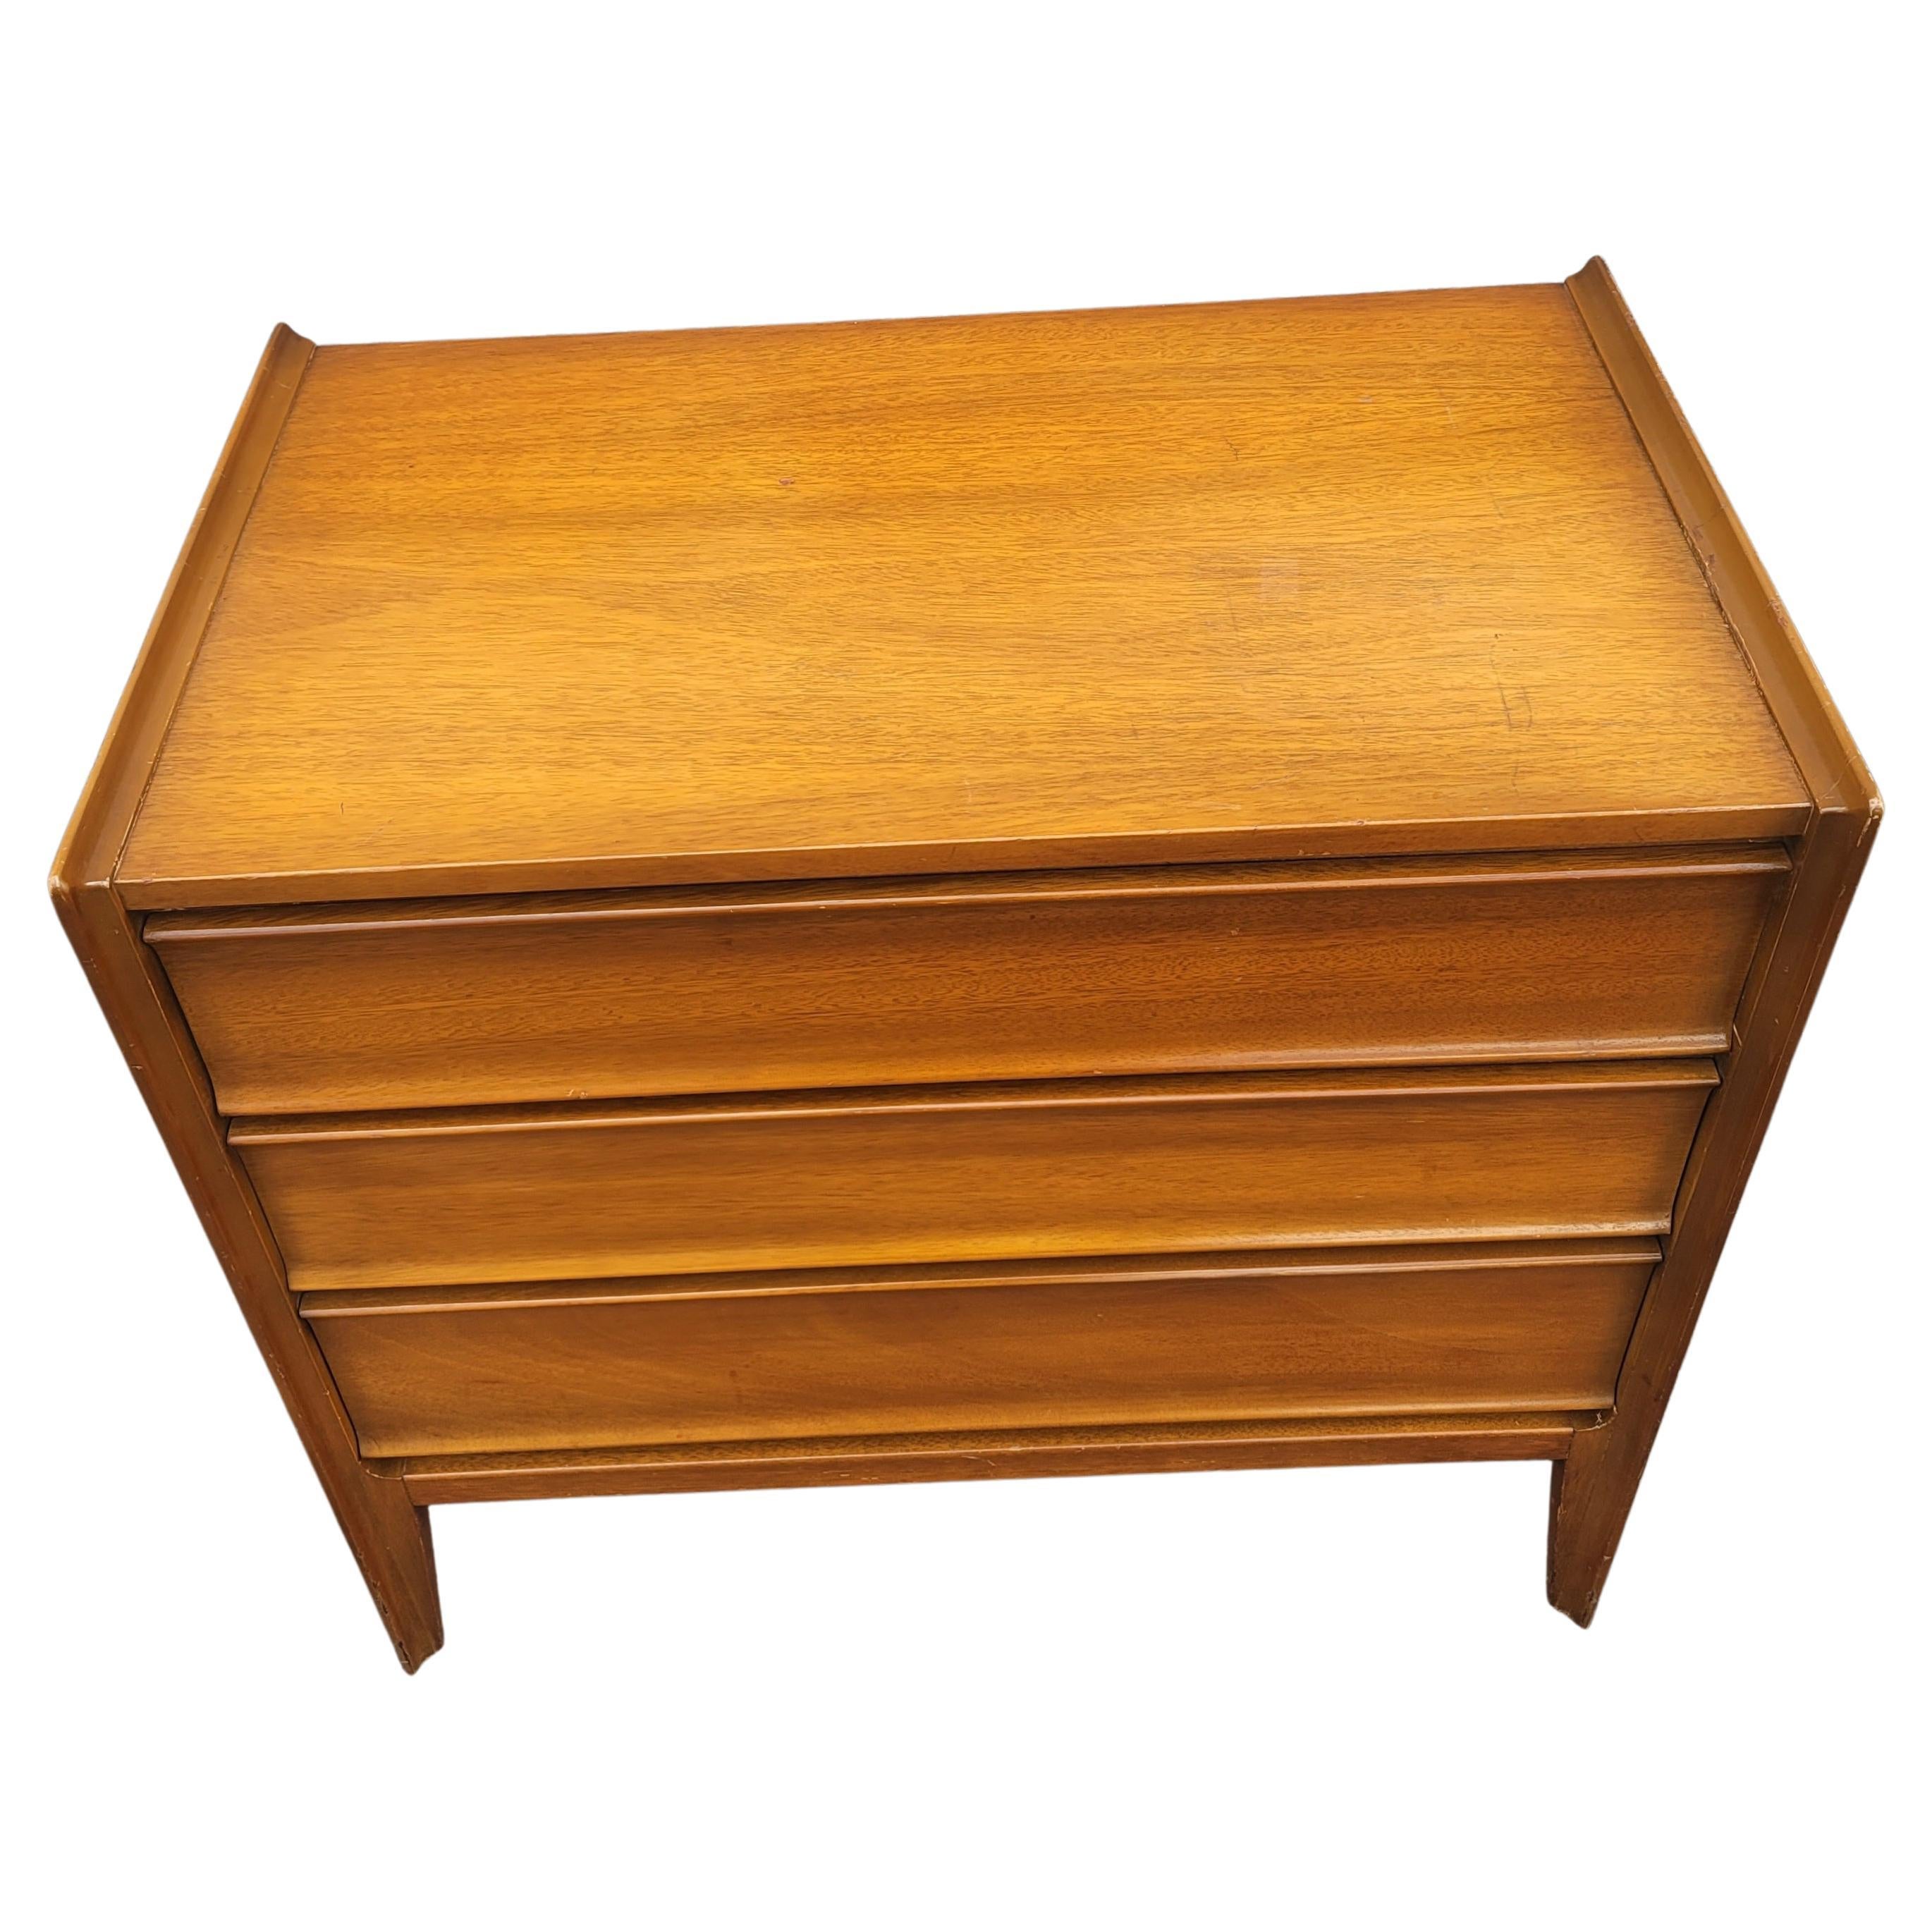 1950s Mid-Century Danish Modern Teak United Furniture Chest of Drawers In Good Condition For Sale In Germantown, MD